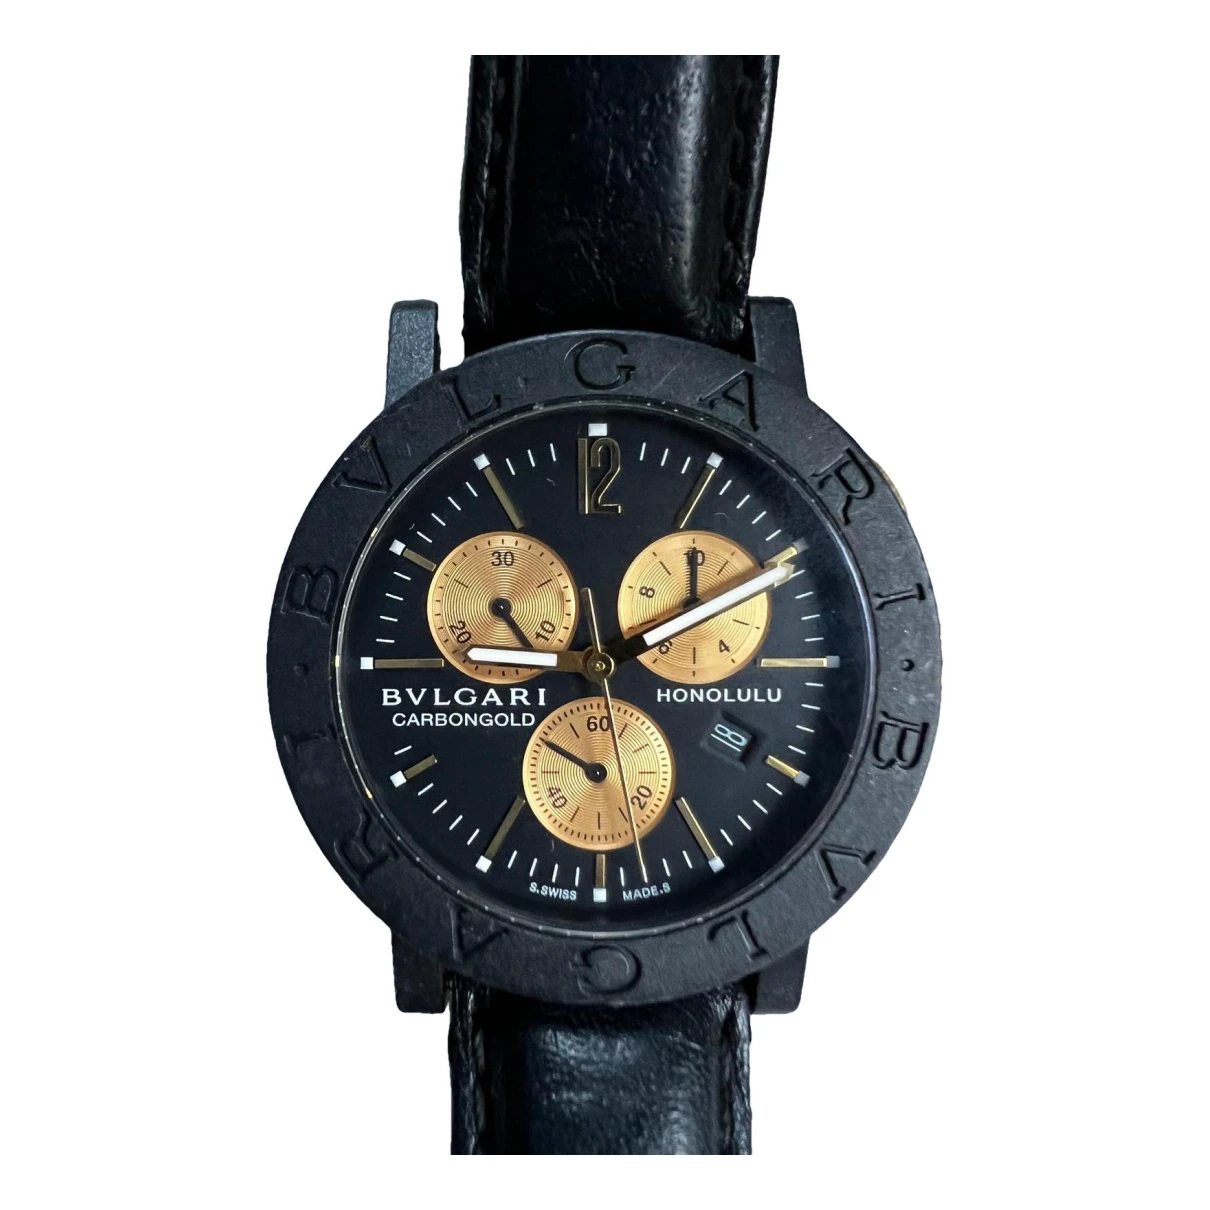 Pre-owned Bvlgari Carbon Gold Yellow Gold Watch In Black